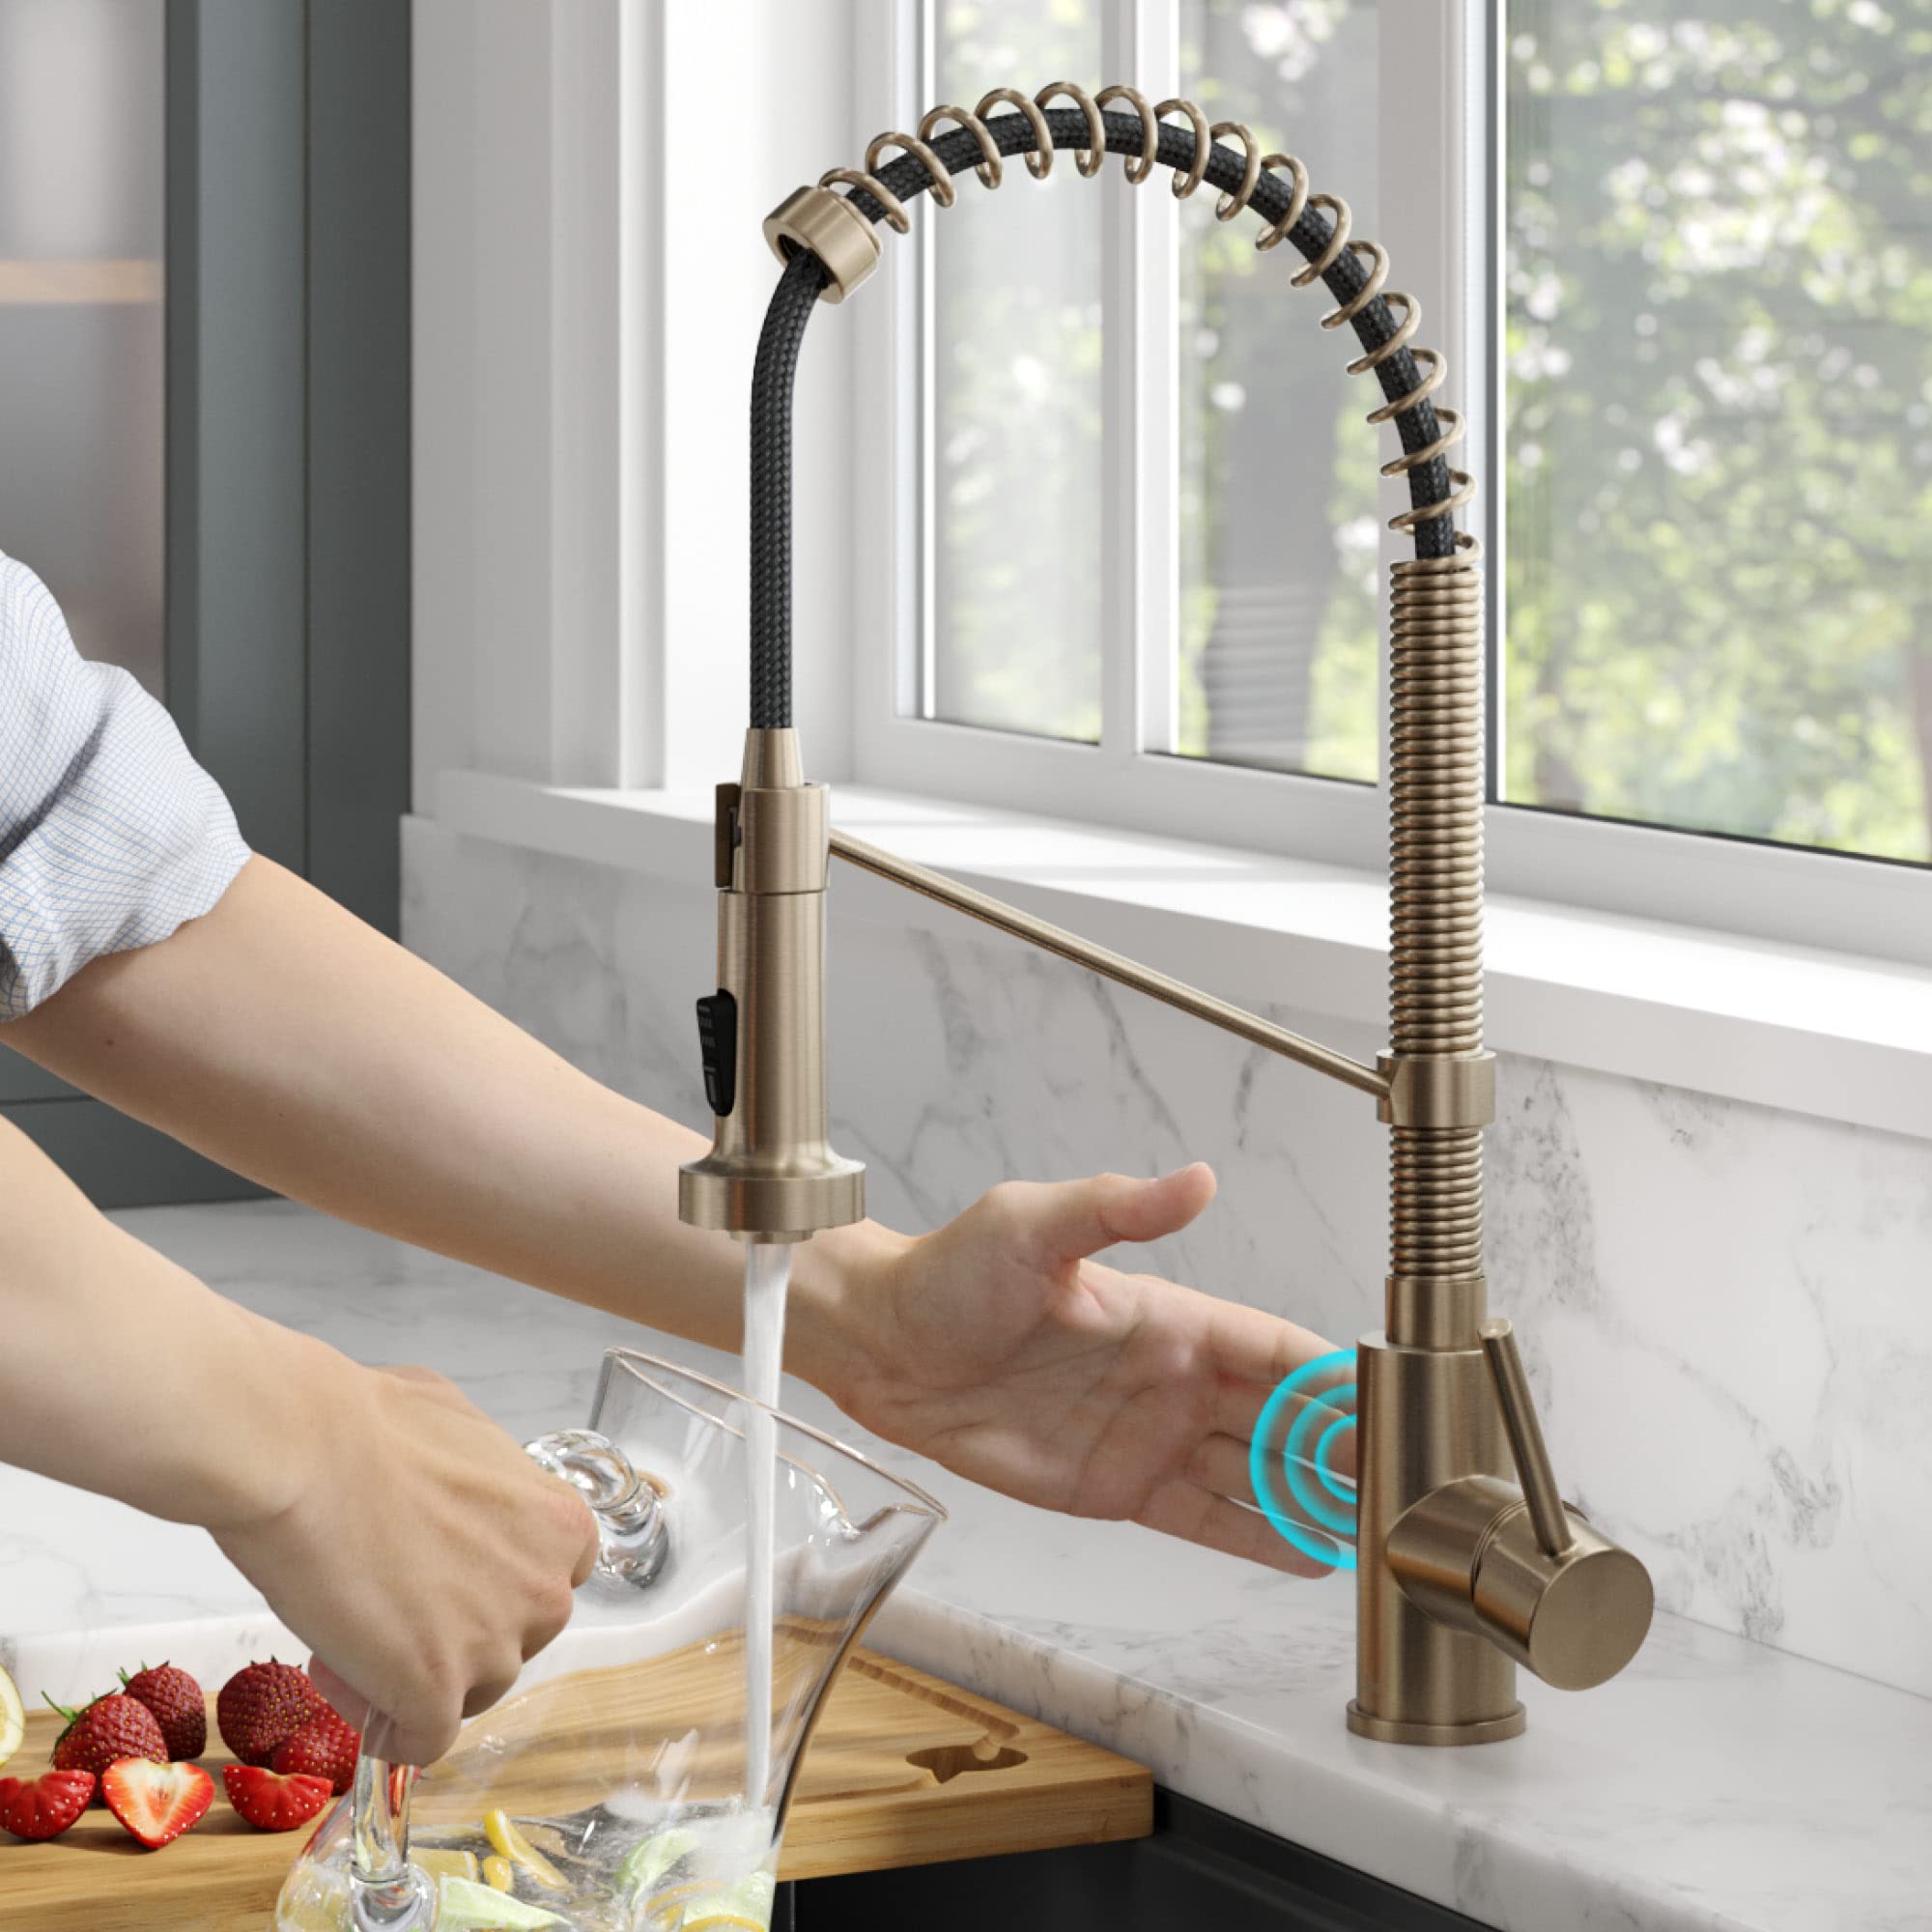 Kraus Bolden Touchless Sensor Commercial Pull-Down Single Handle 18-Inch Kitchen Faucet in Spot Free Antique Champagne Bronze, KSF-1610SFACB